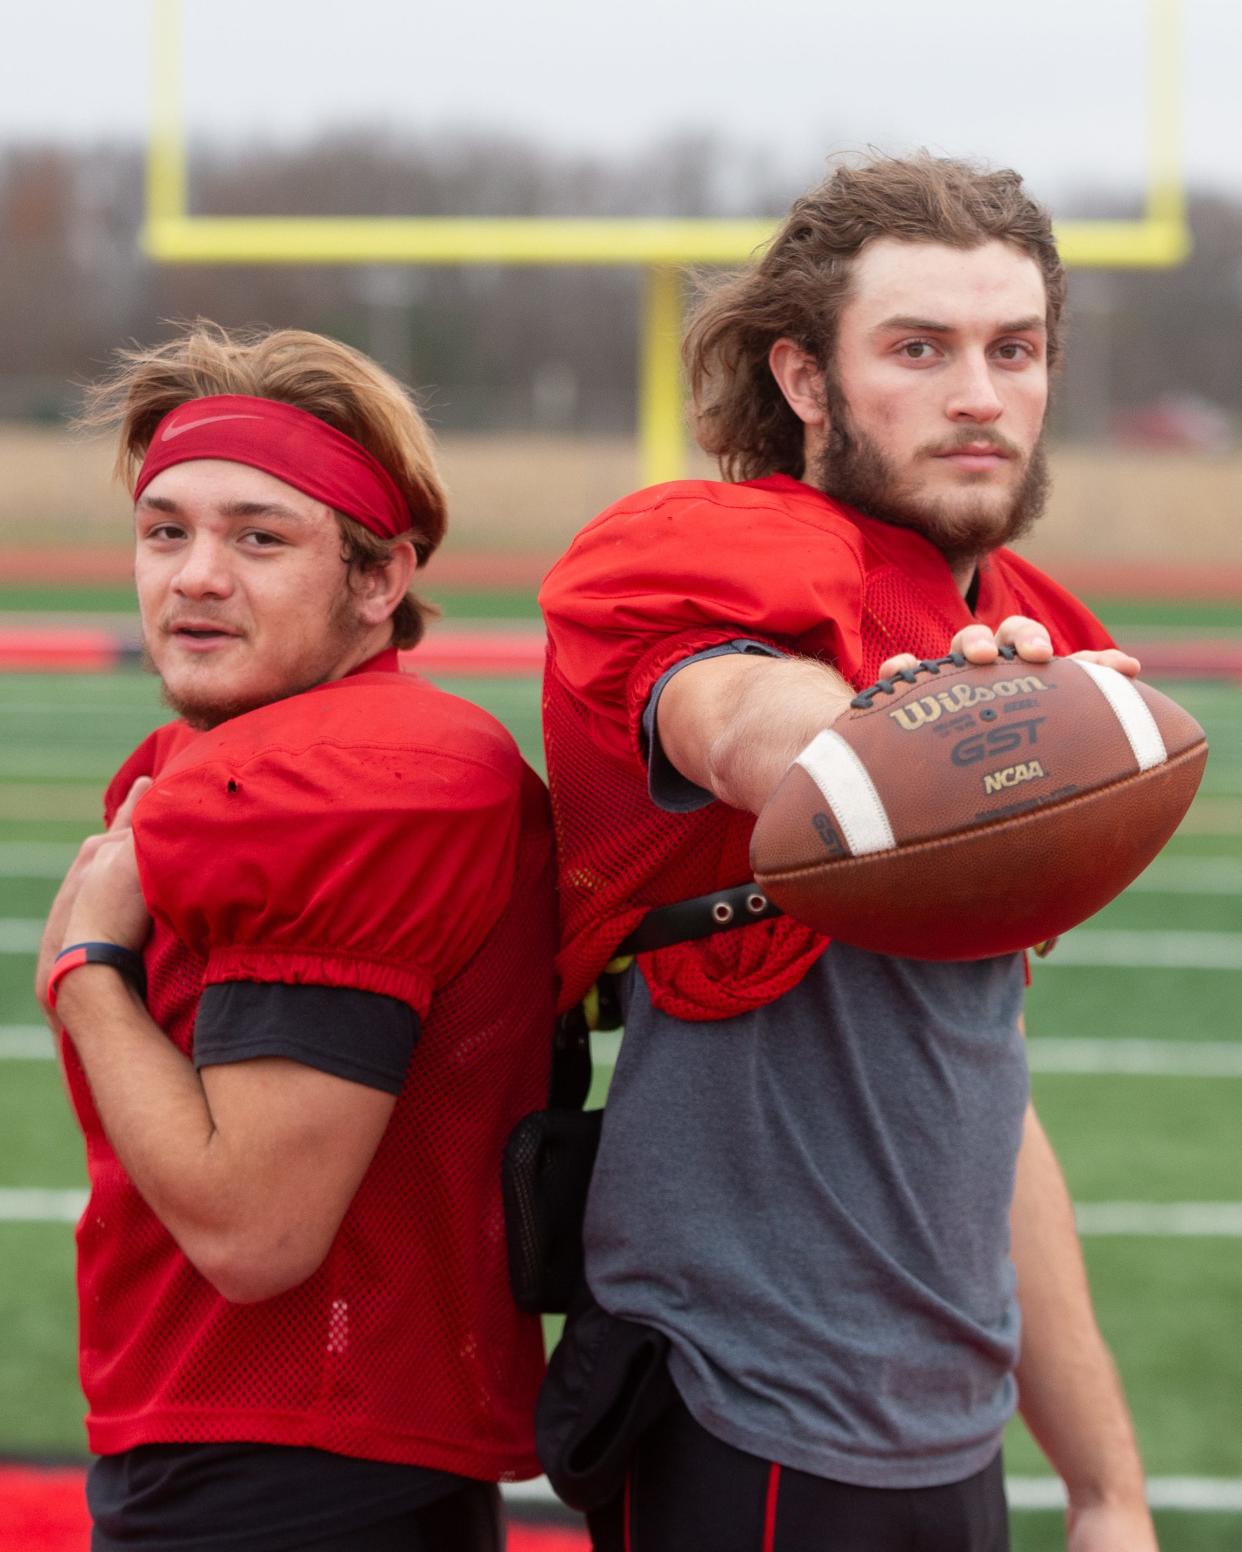 It doesn't take long to figure out that Rossville senior running back Corey Cantron, left, and senior quarterback Torrey Horak have figured out what works best to make winning plays. They have, after all, been practicing together since they were kids.